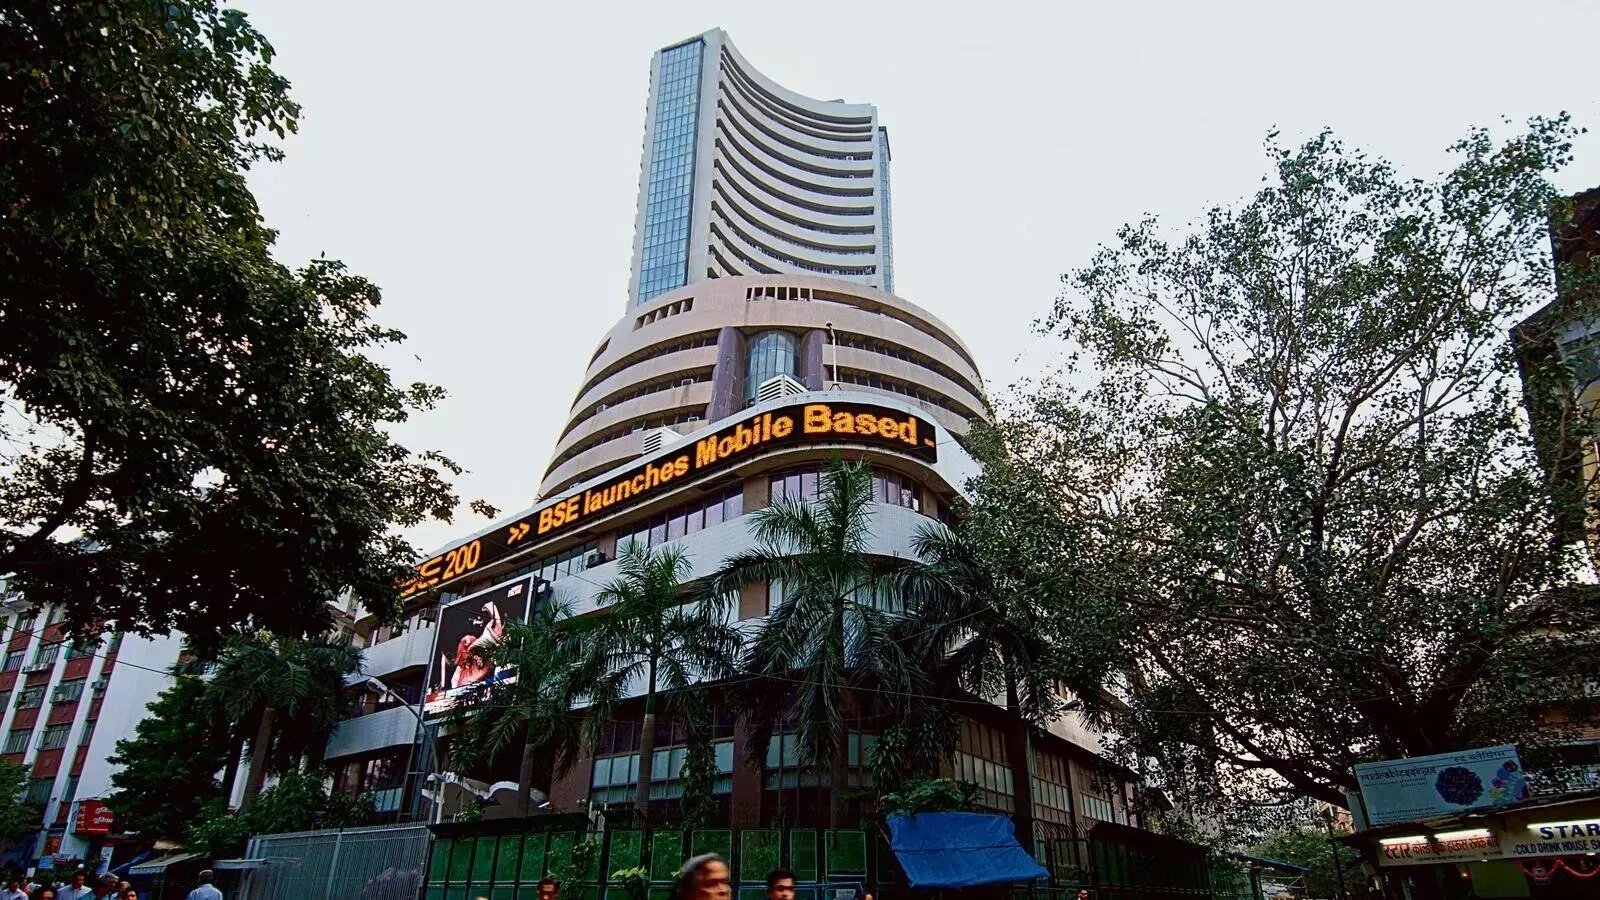 Stock market today: Sensex, Nifty 50 fall for second day as geopolitical tensions mount, rate cut hopes fizzle out